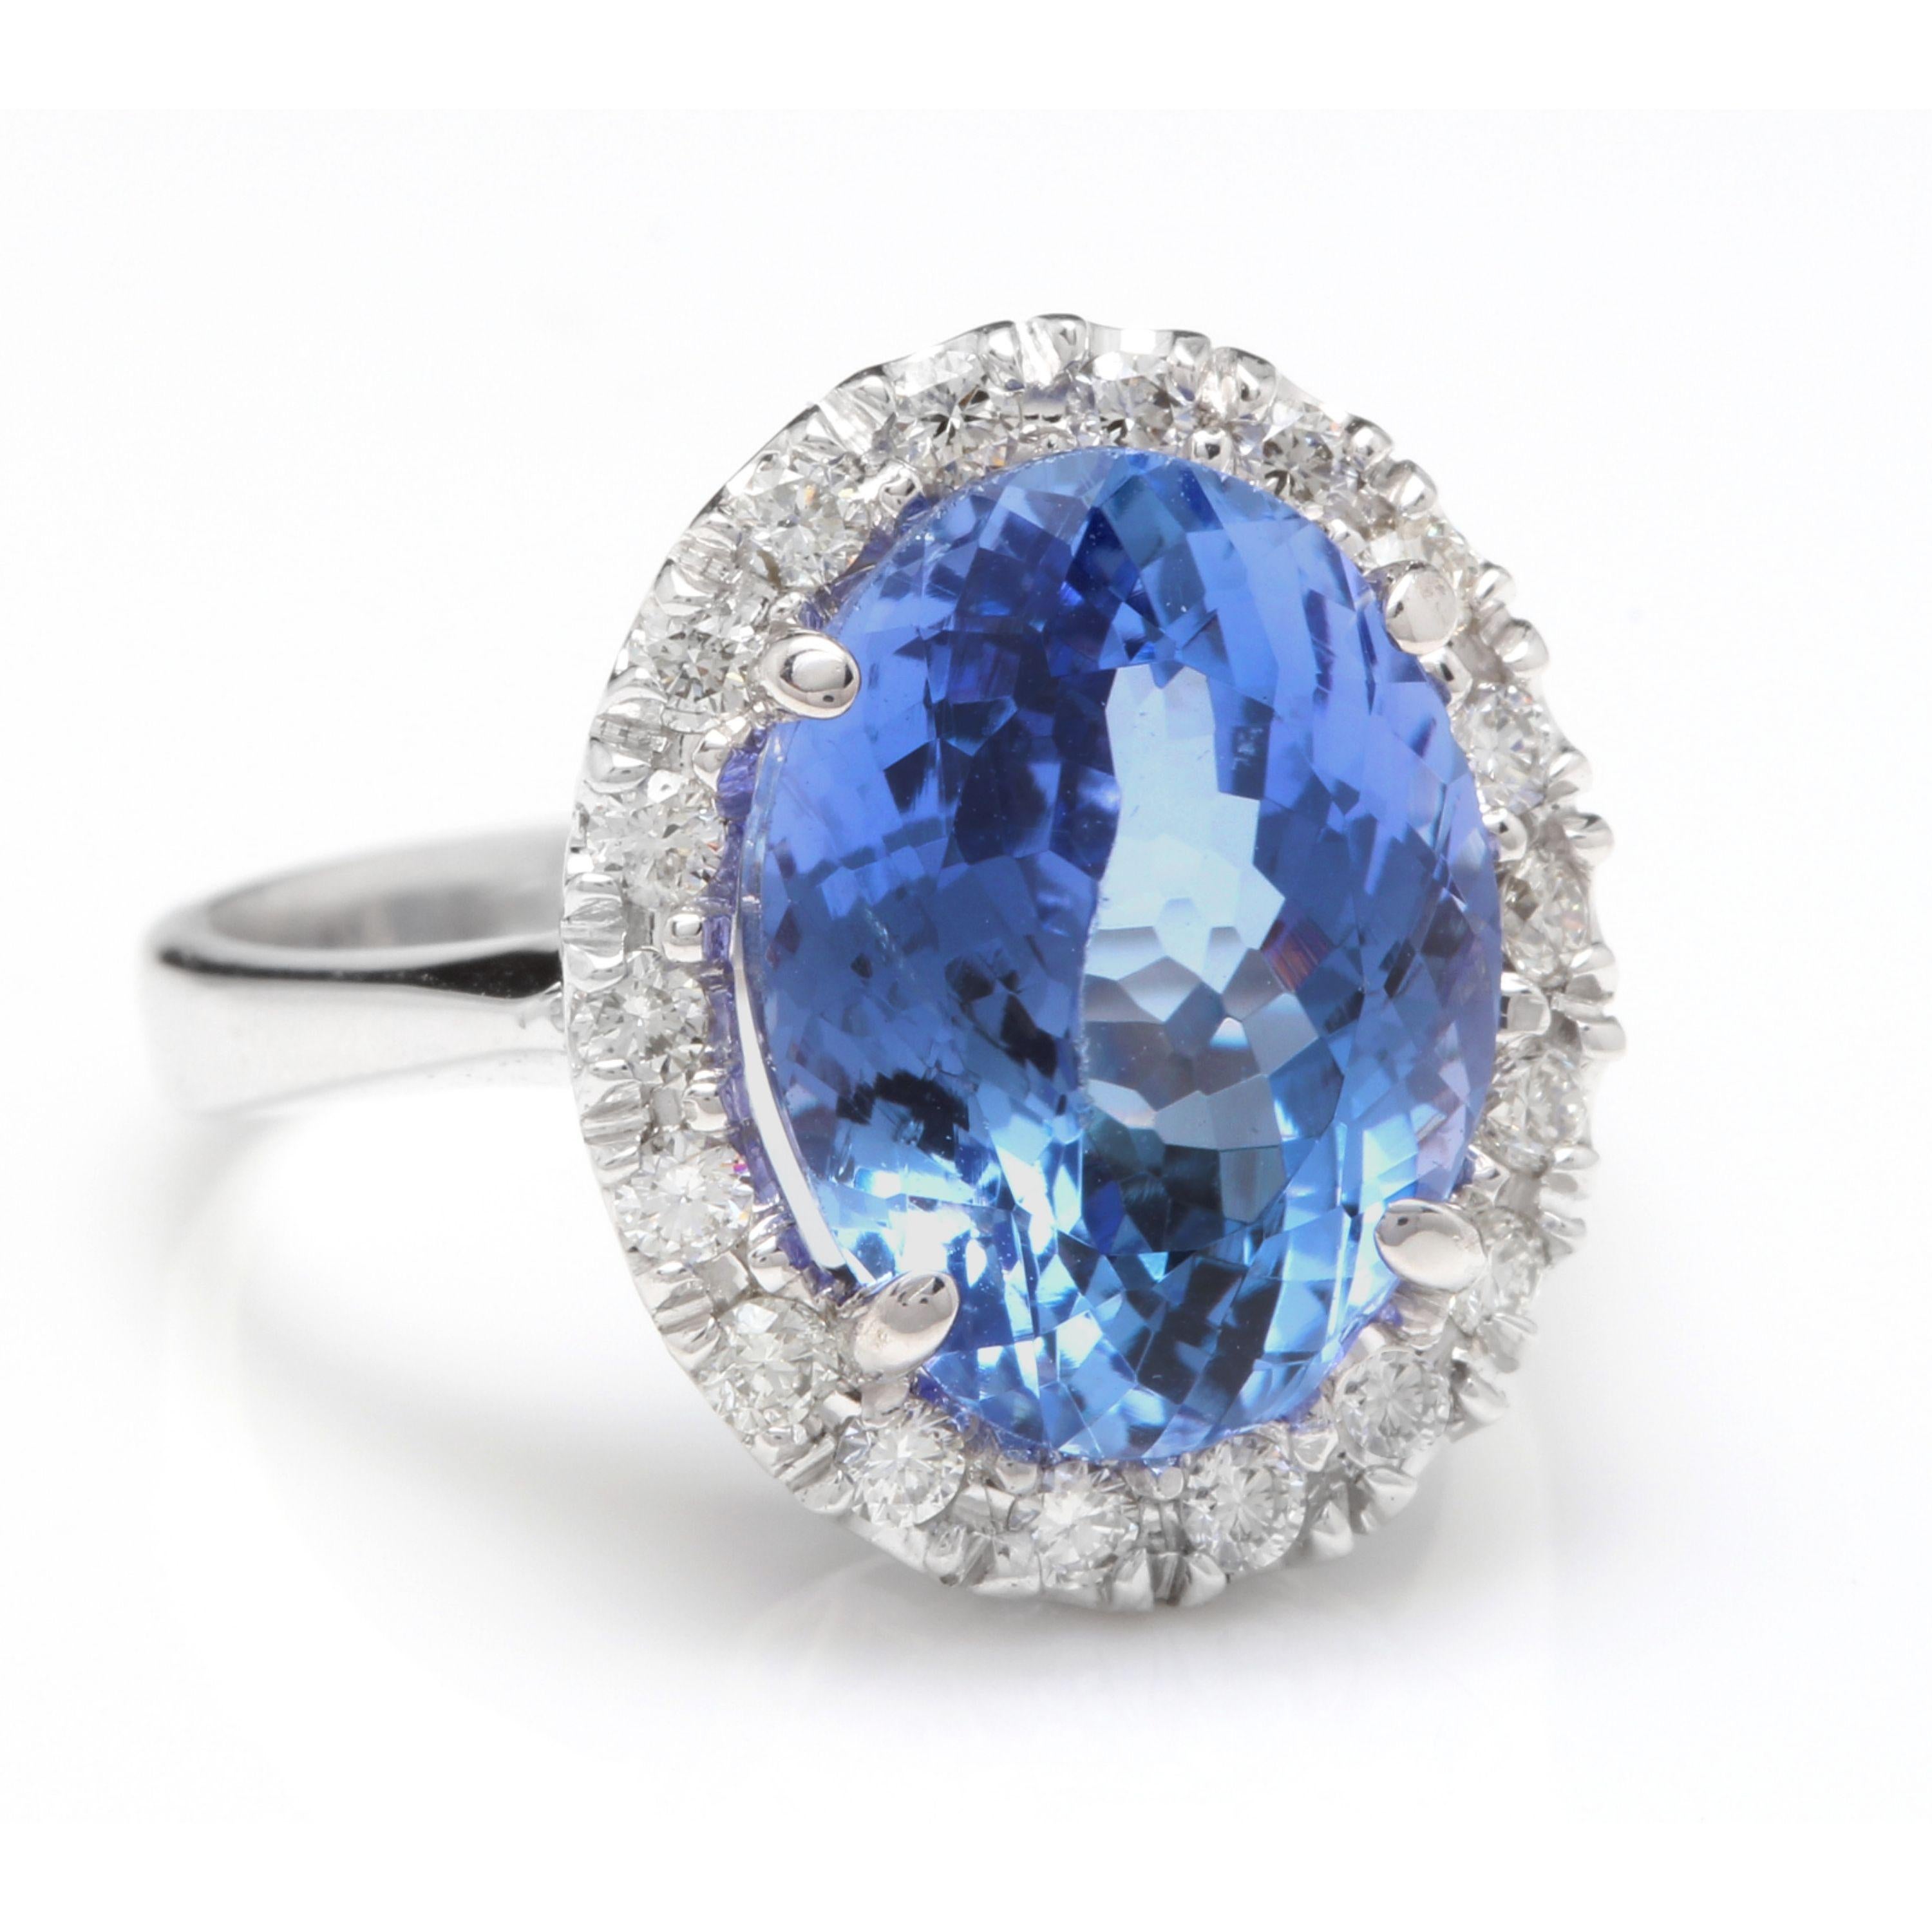 7.70 Carats Natural Splendid Tanzanite and Diamond 14K Solid White Gold Ring

Total Natural Oval Cut Tanzanite Weight is: Approx. 7.00 Carats

Natural Round Diamonds Weight: Approx. 0.70 Carats (color G-H / Clarity SI1-SI2)

Ring size: 7 (we offer